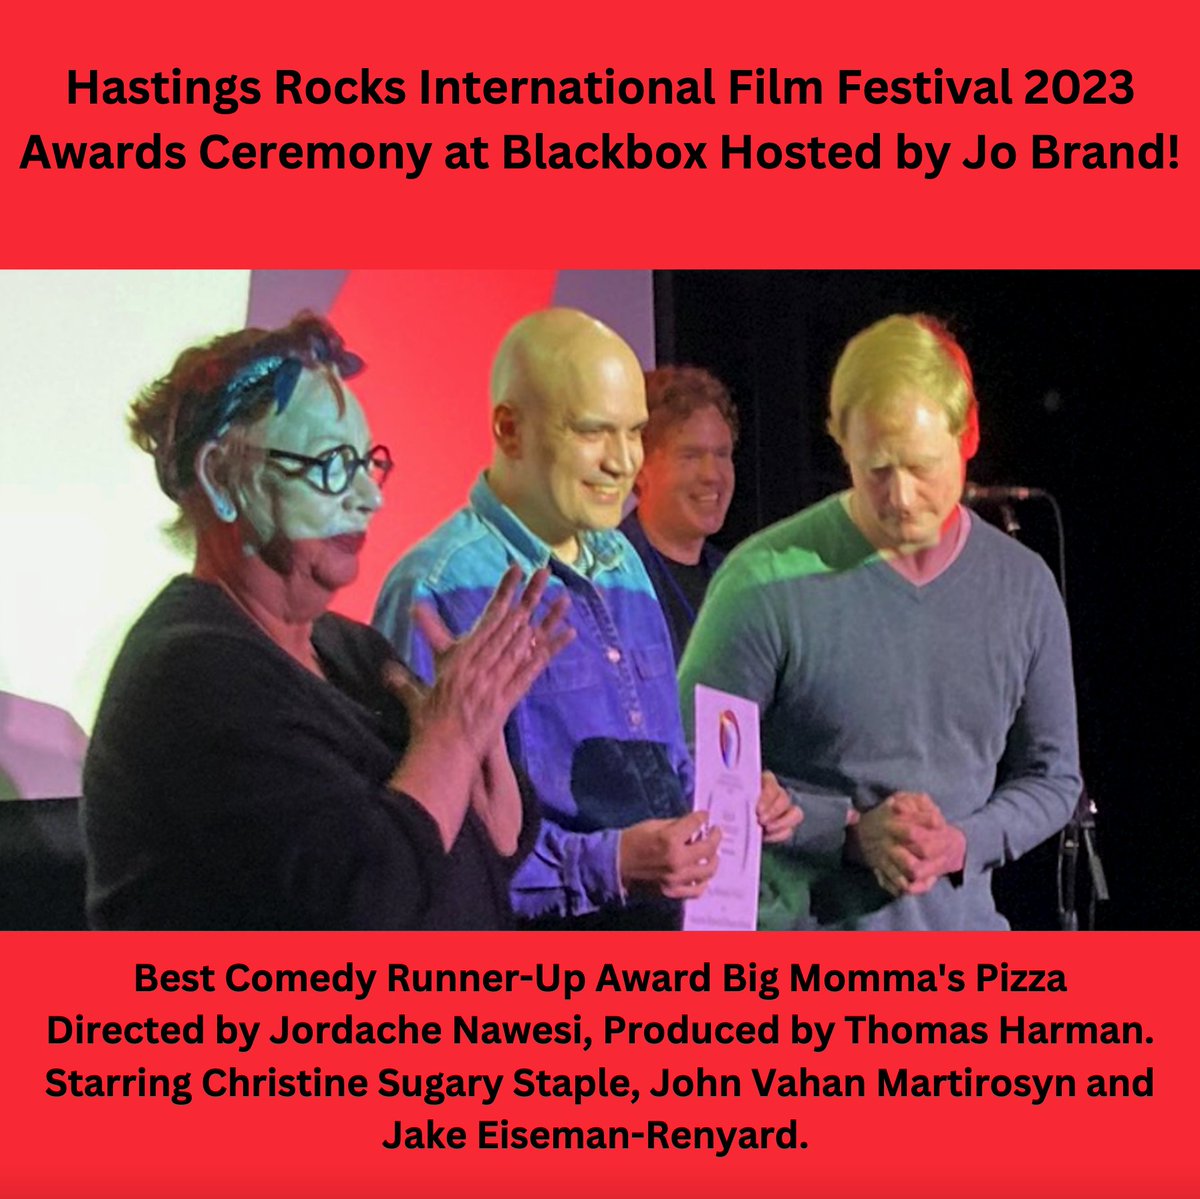 It's not everyday you get presented #BestComedy Runner-Up by #Hastings own #JoBrand! With #BigMommasPizza picking up the honour at this years #HastingsRocksInternationalFilmFestival 2023 held at @BlackBoxHST Hastings. 

#RunnerUpAwardWinner #Comedy #Film #HRIFF #HRIFF23